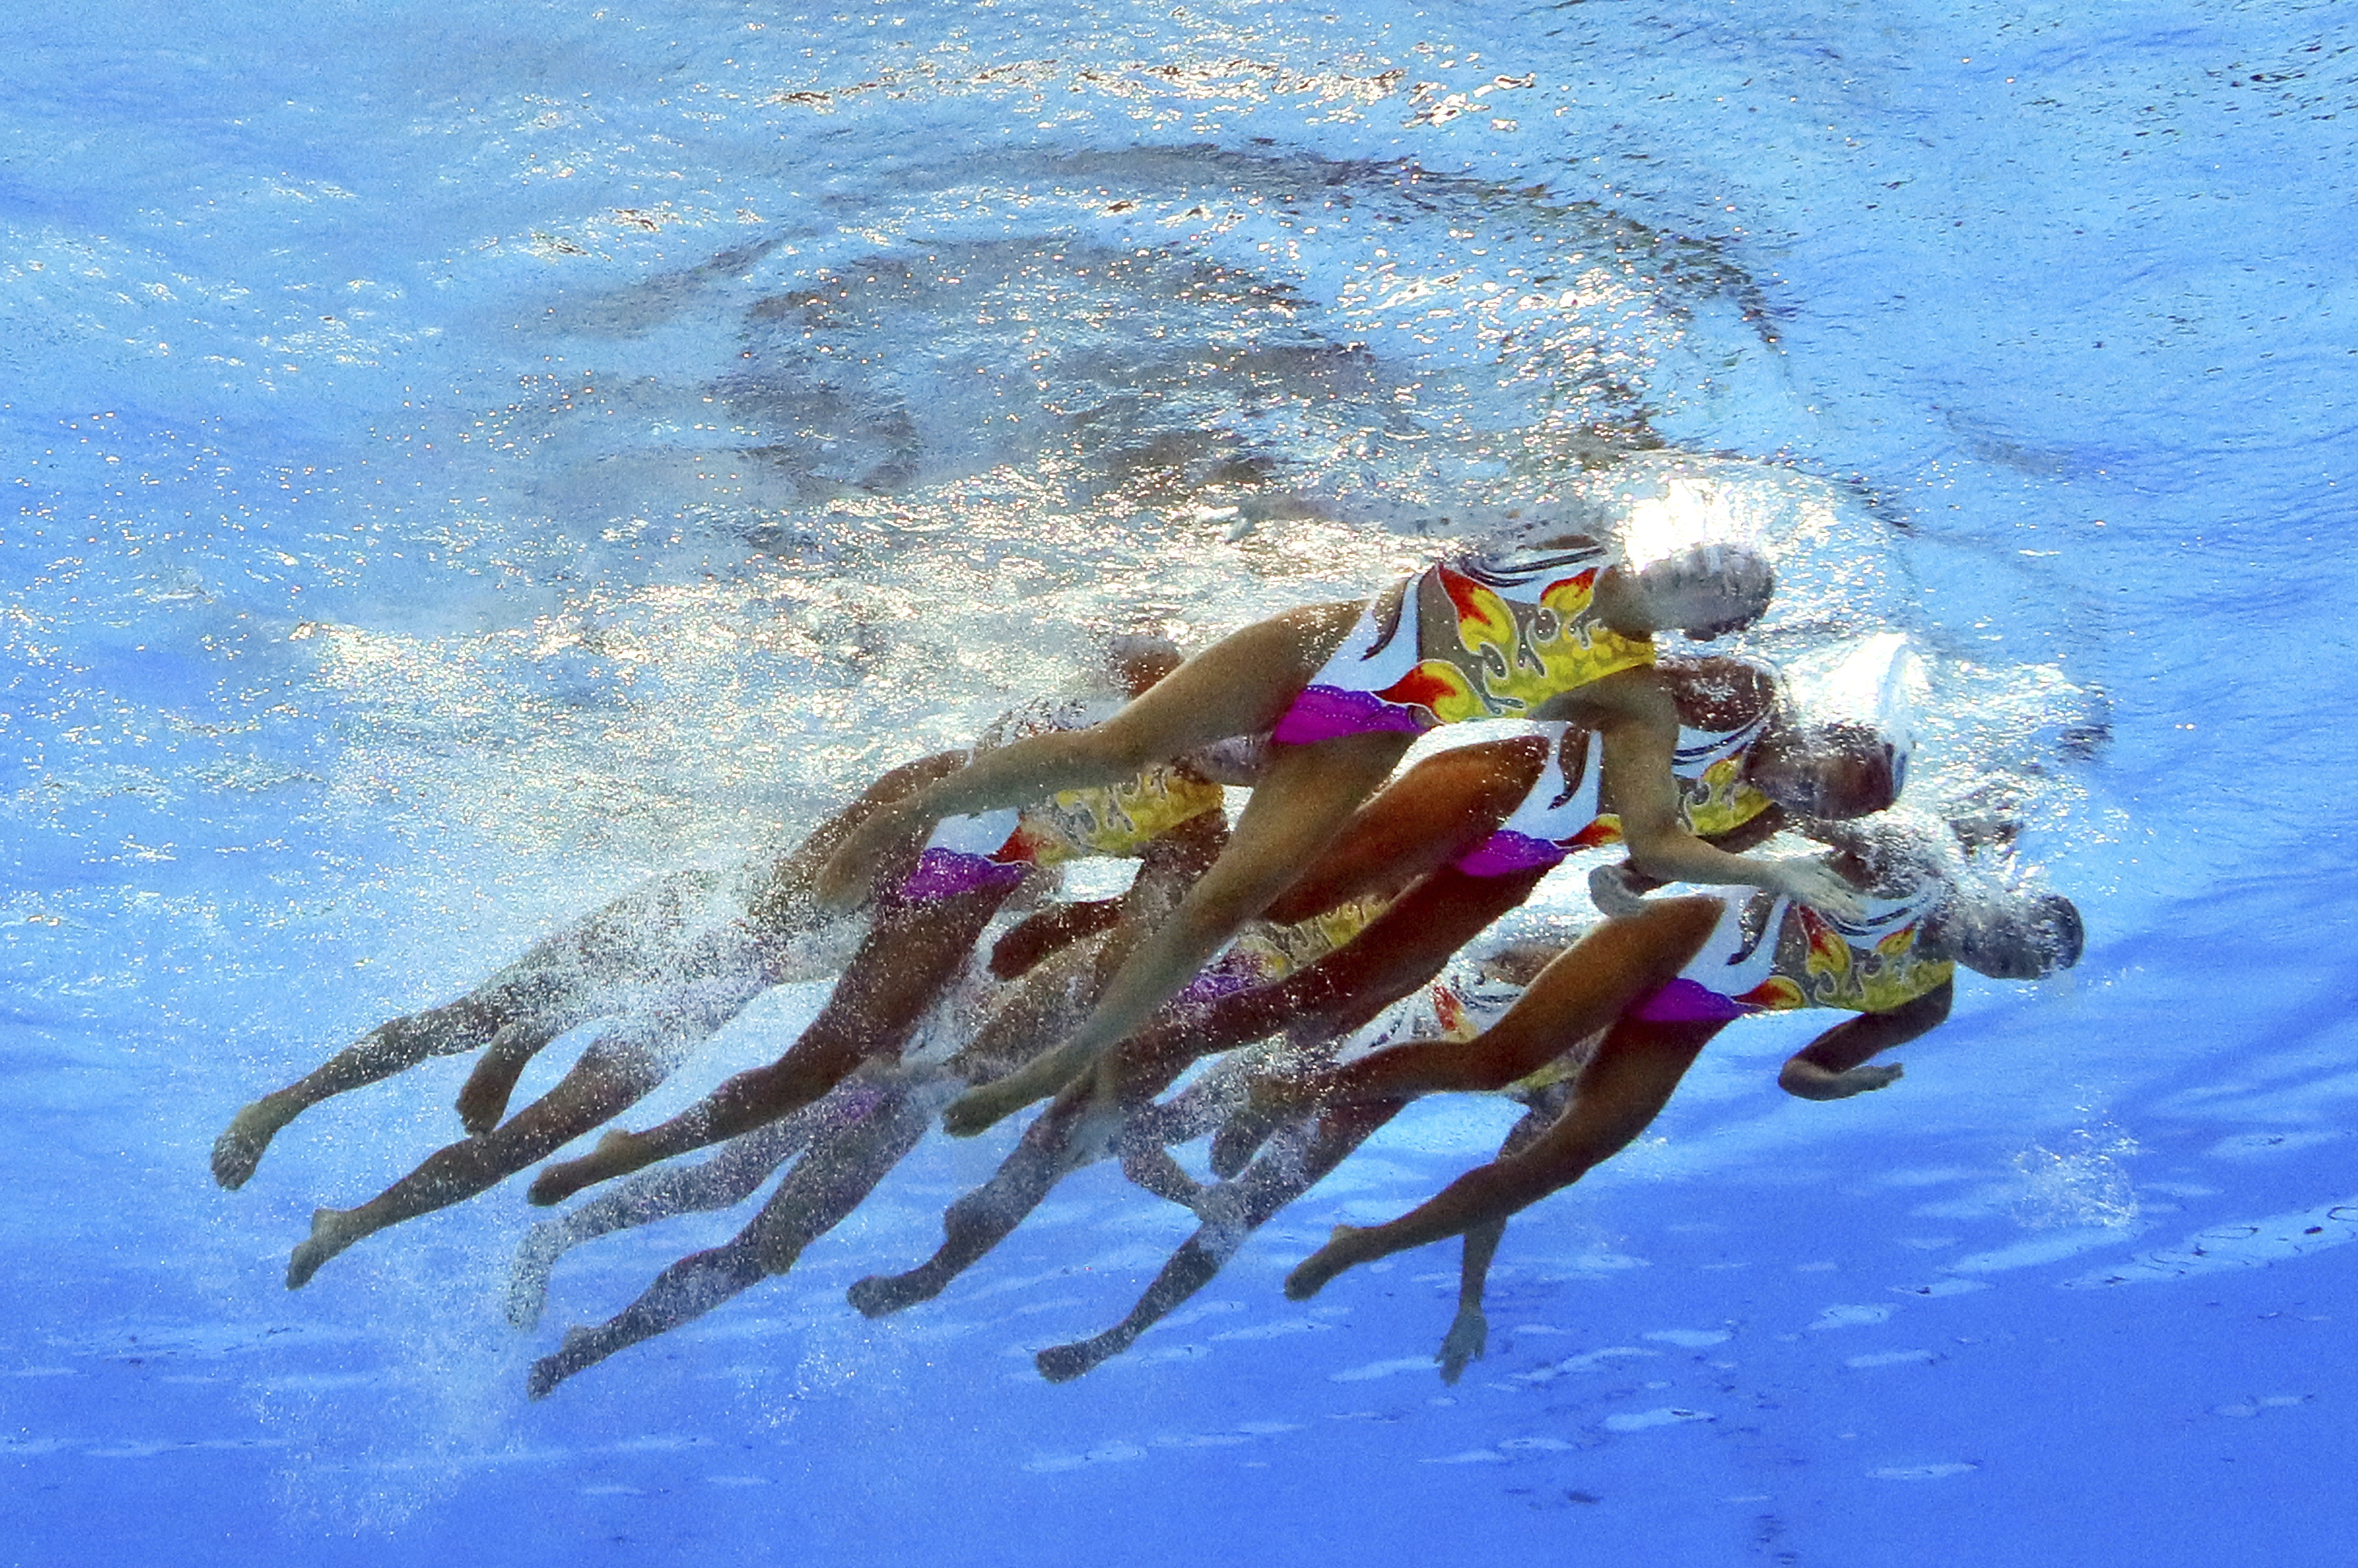 Japanese team compete during the women's team free in the synchronized swimming of the FINA World Championships at Budapest, Hungary, on July 19, 2017. ( The Yomiuri Shimbun via AP Images )